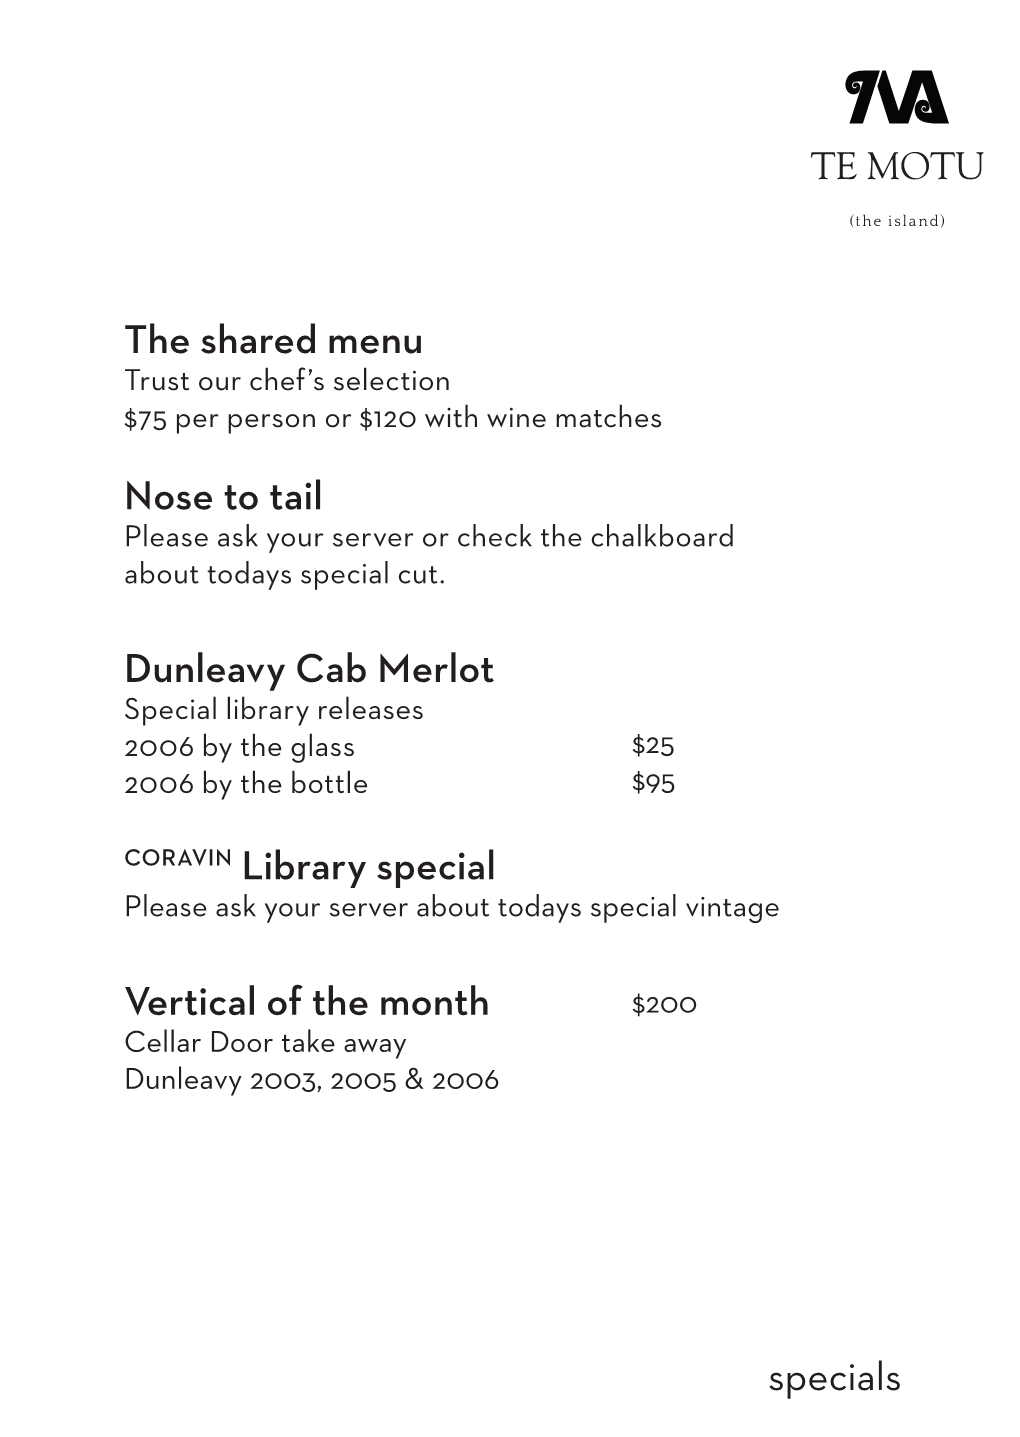 Specials the Shared Menu Nose to Tail Dunleavy Cab Merlot